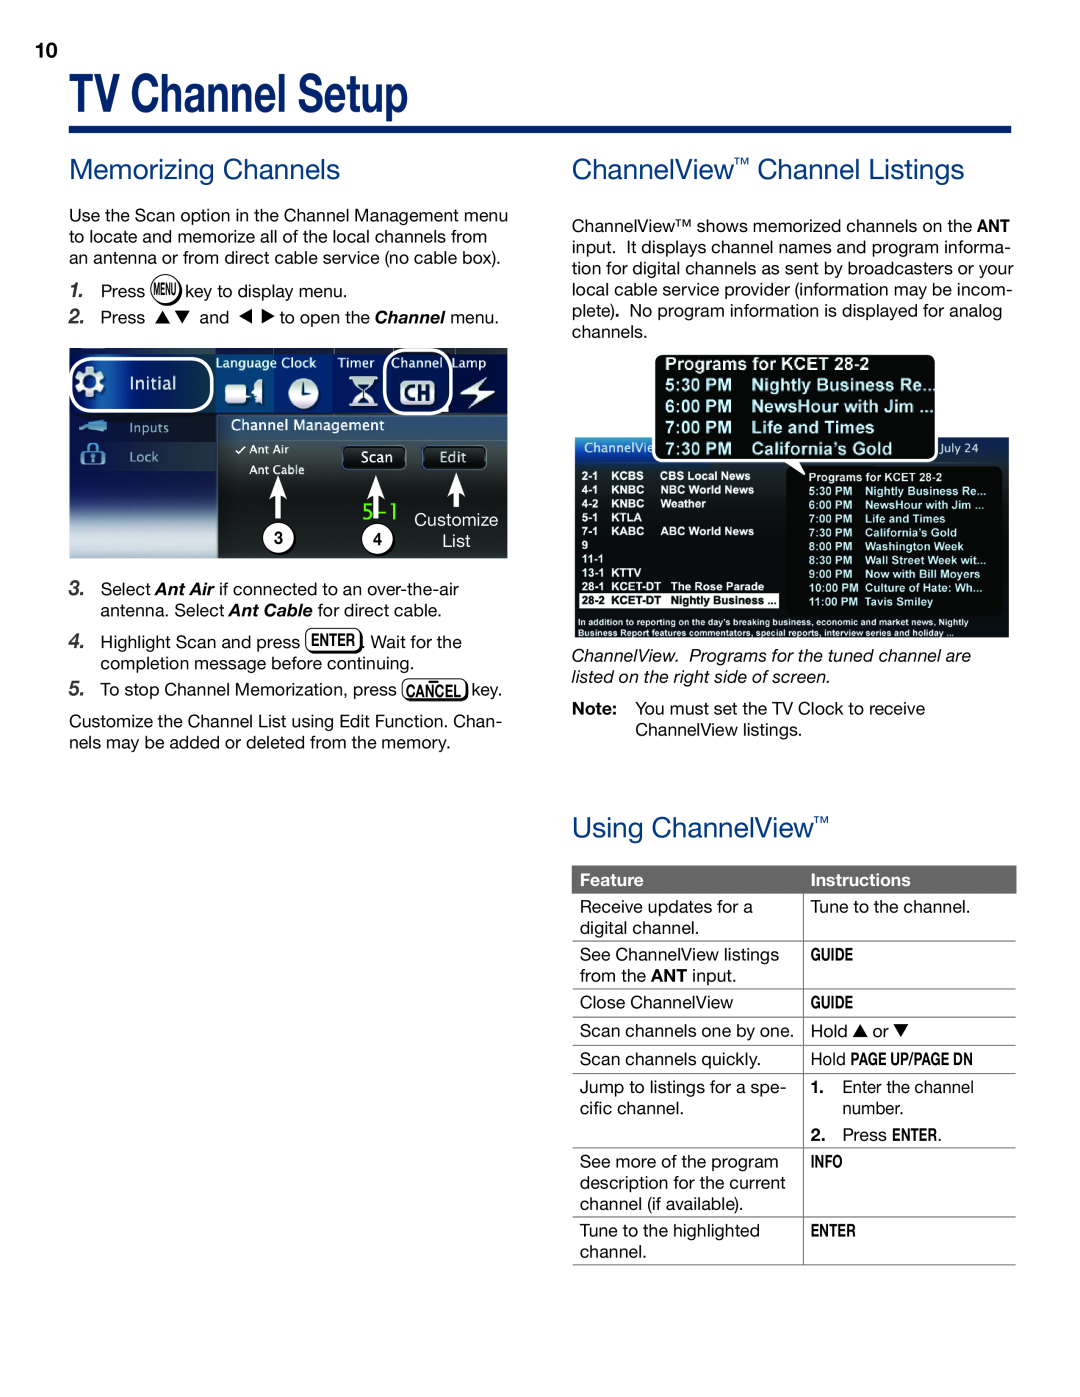 Mitsubishi Electronics WD-73837 TV Channel Setup, Memorizing Channels, ChannelView Channel Listings, Using ChannelView 